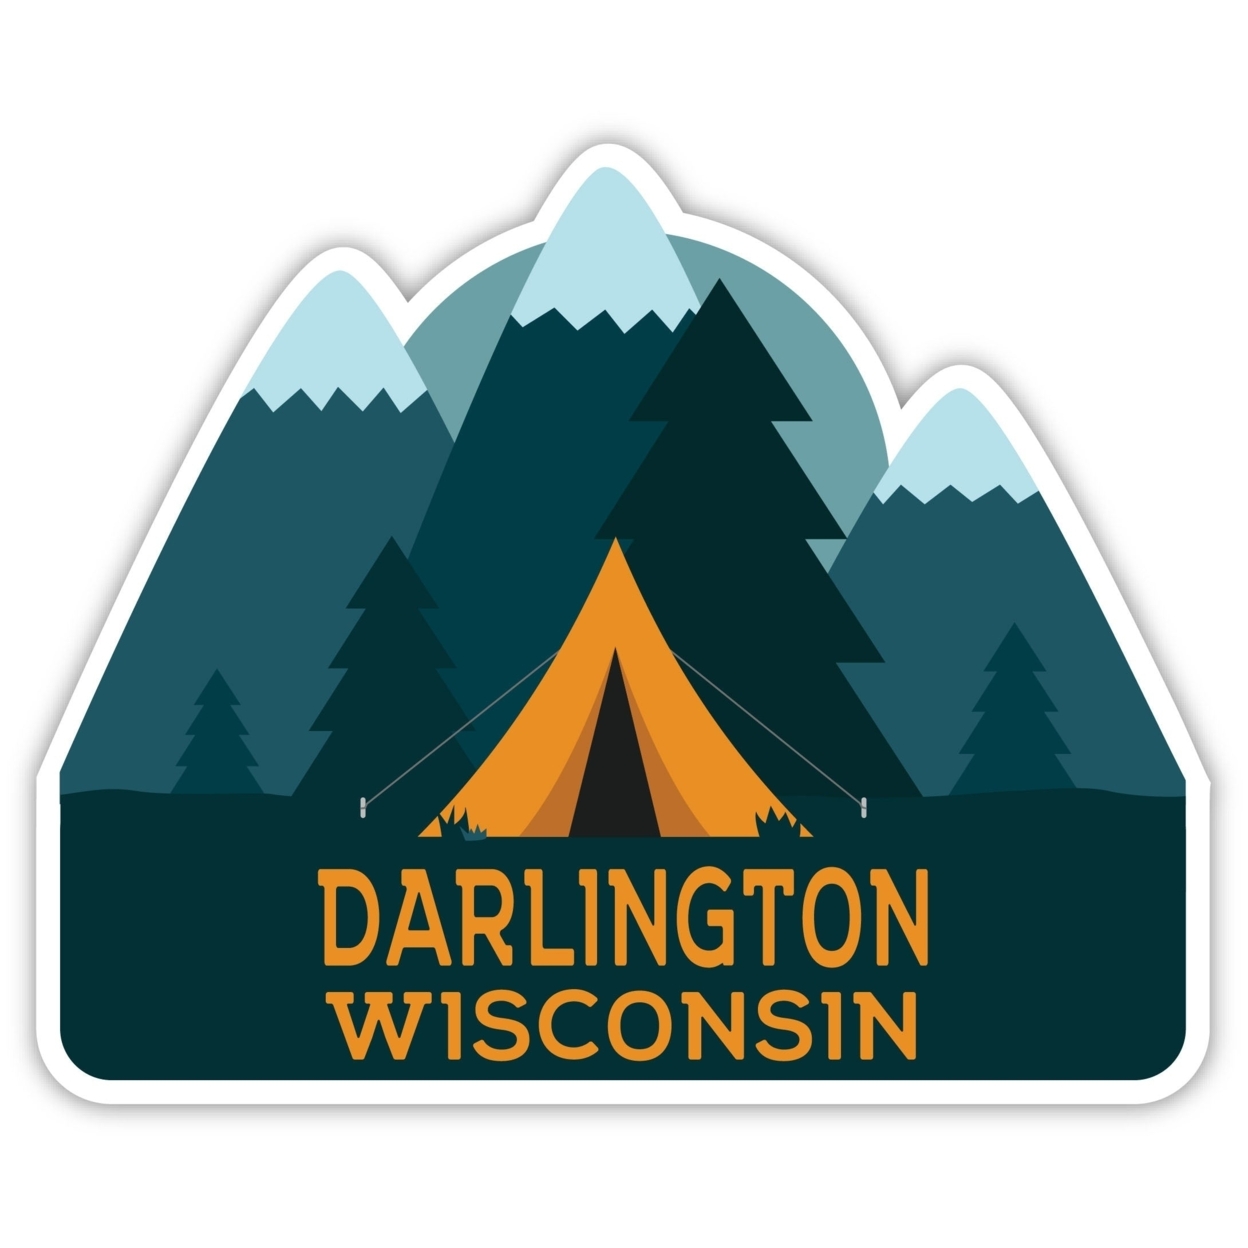 Darlington Wisconsin Souvenir Decorative Stickers (Choose Theme And Size) - 4-Pack, 4-Inch, Tent